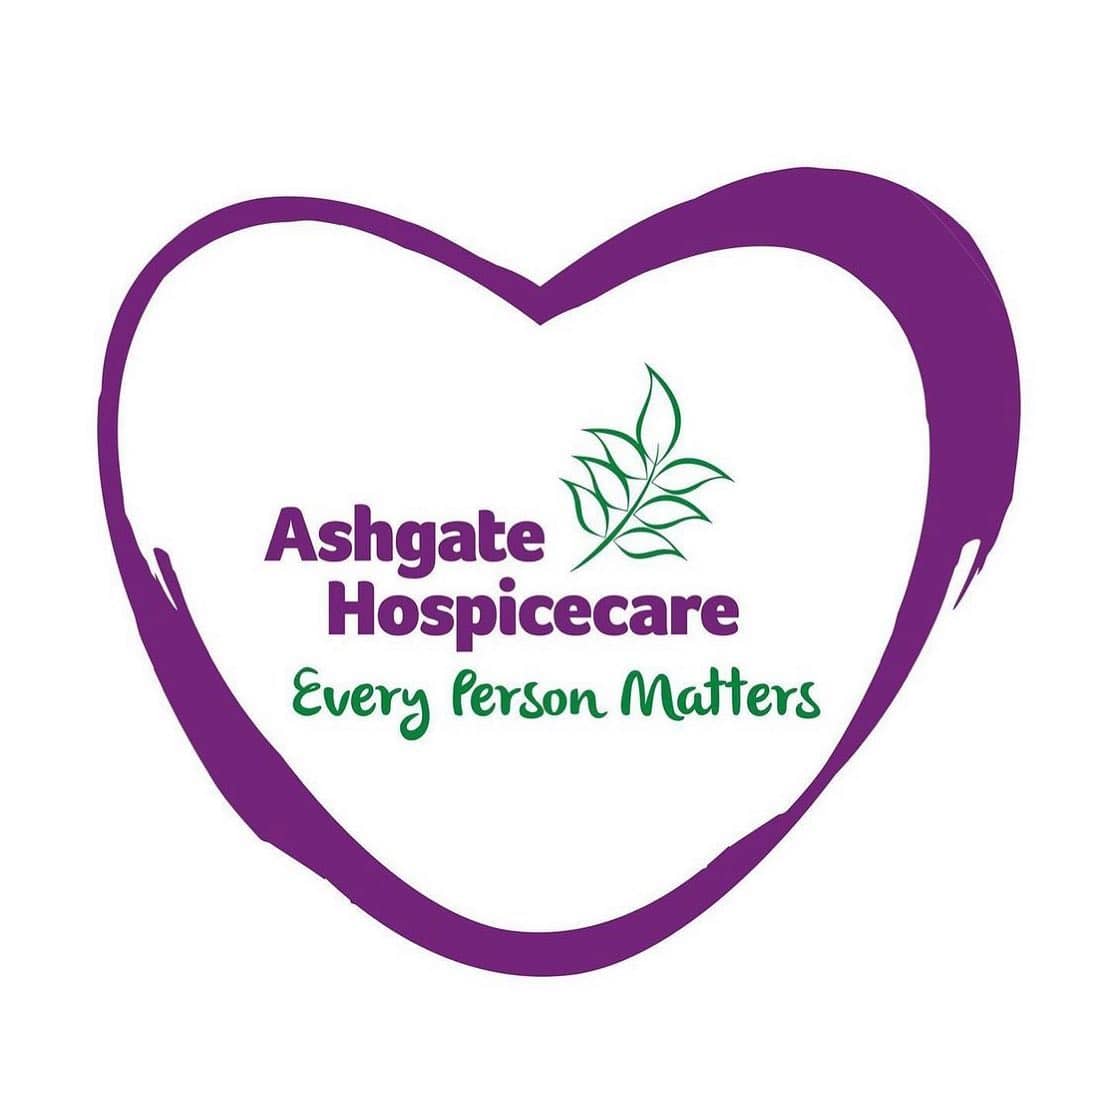 This week’s Charity Tuesday goes to @ashgatehospicecare who are joining the Peak District Challen...